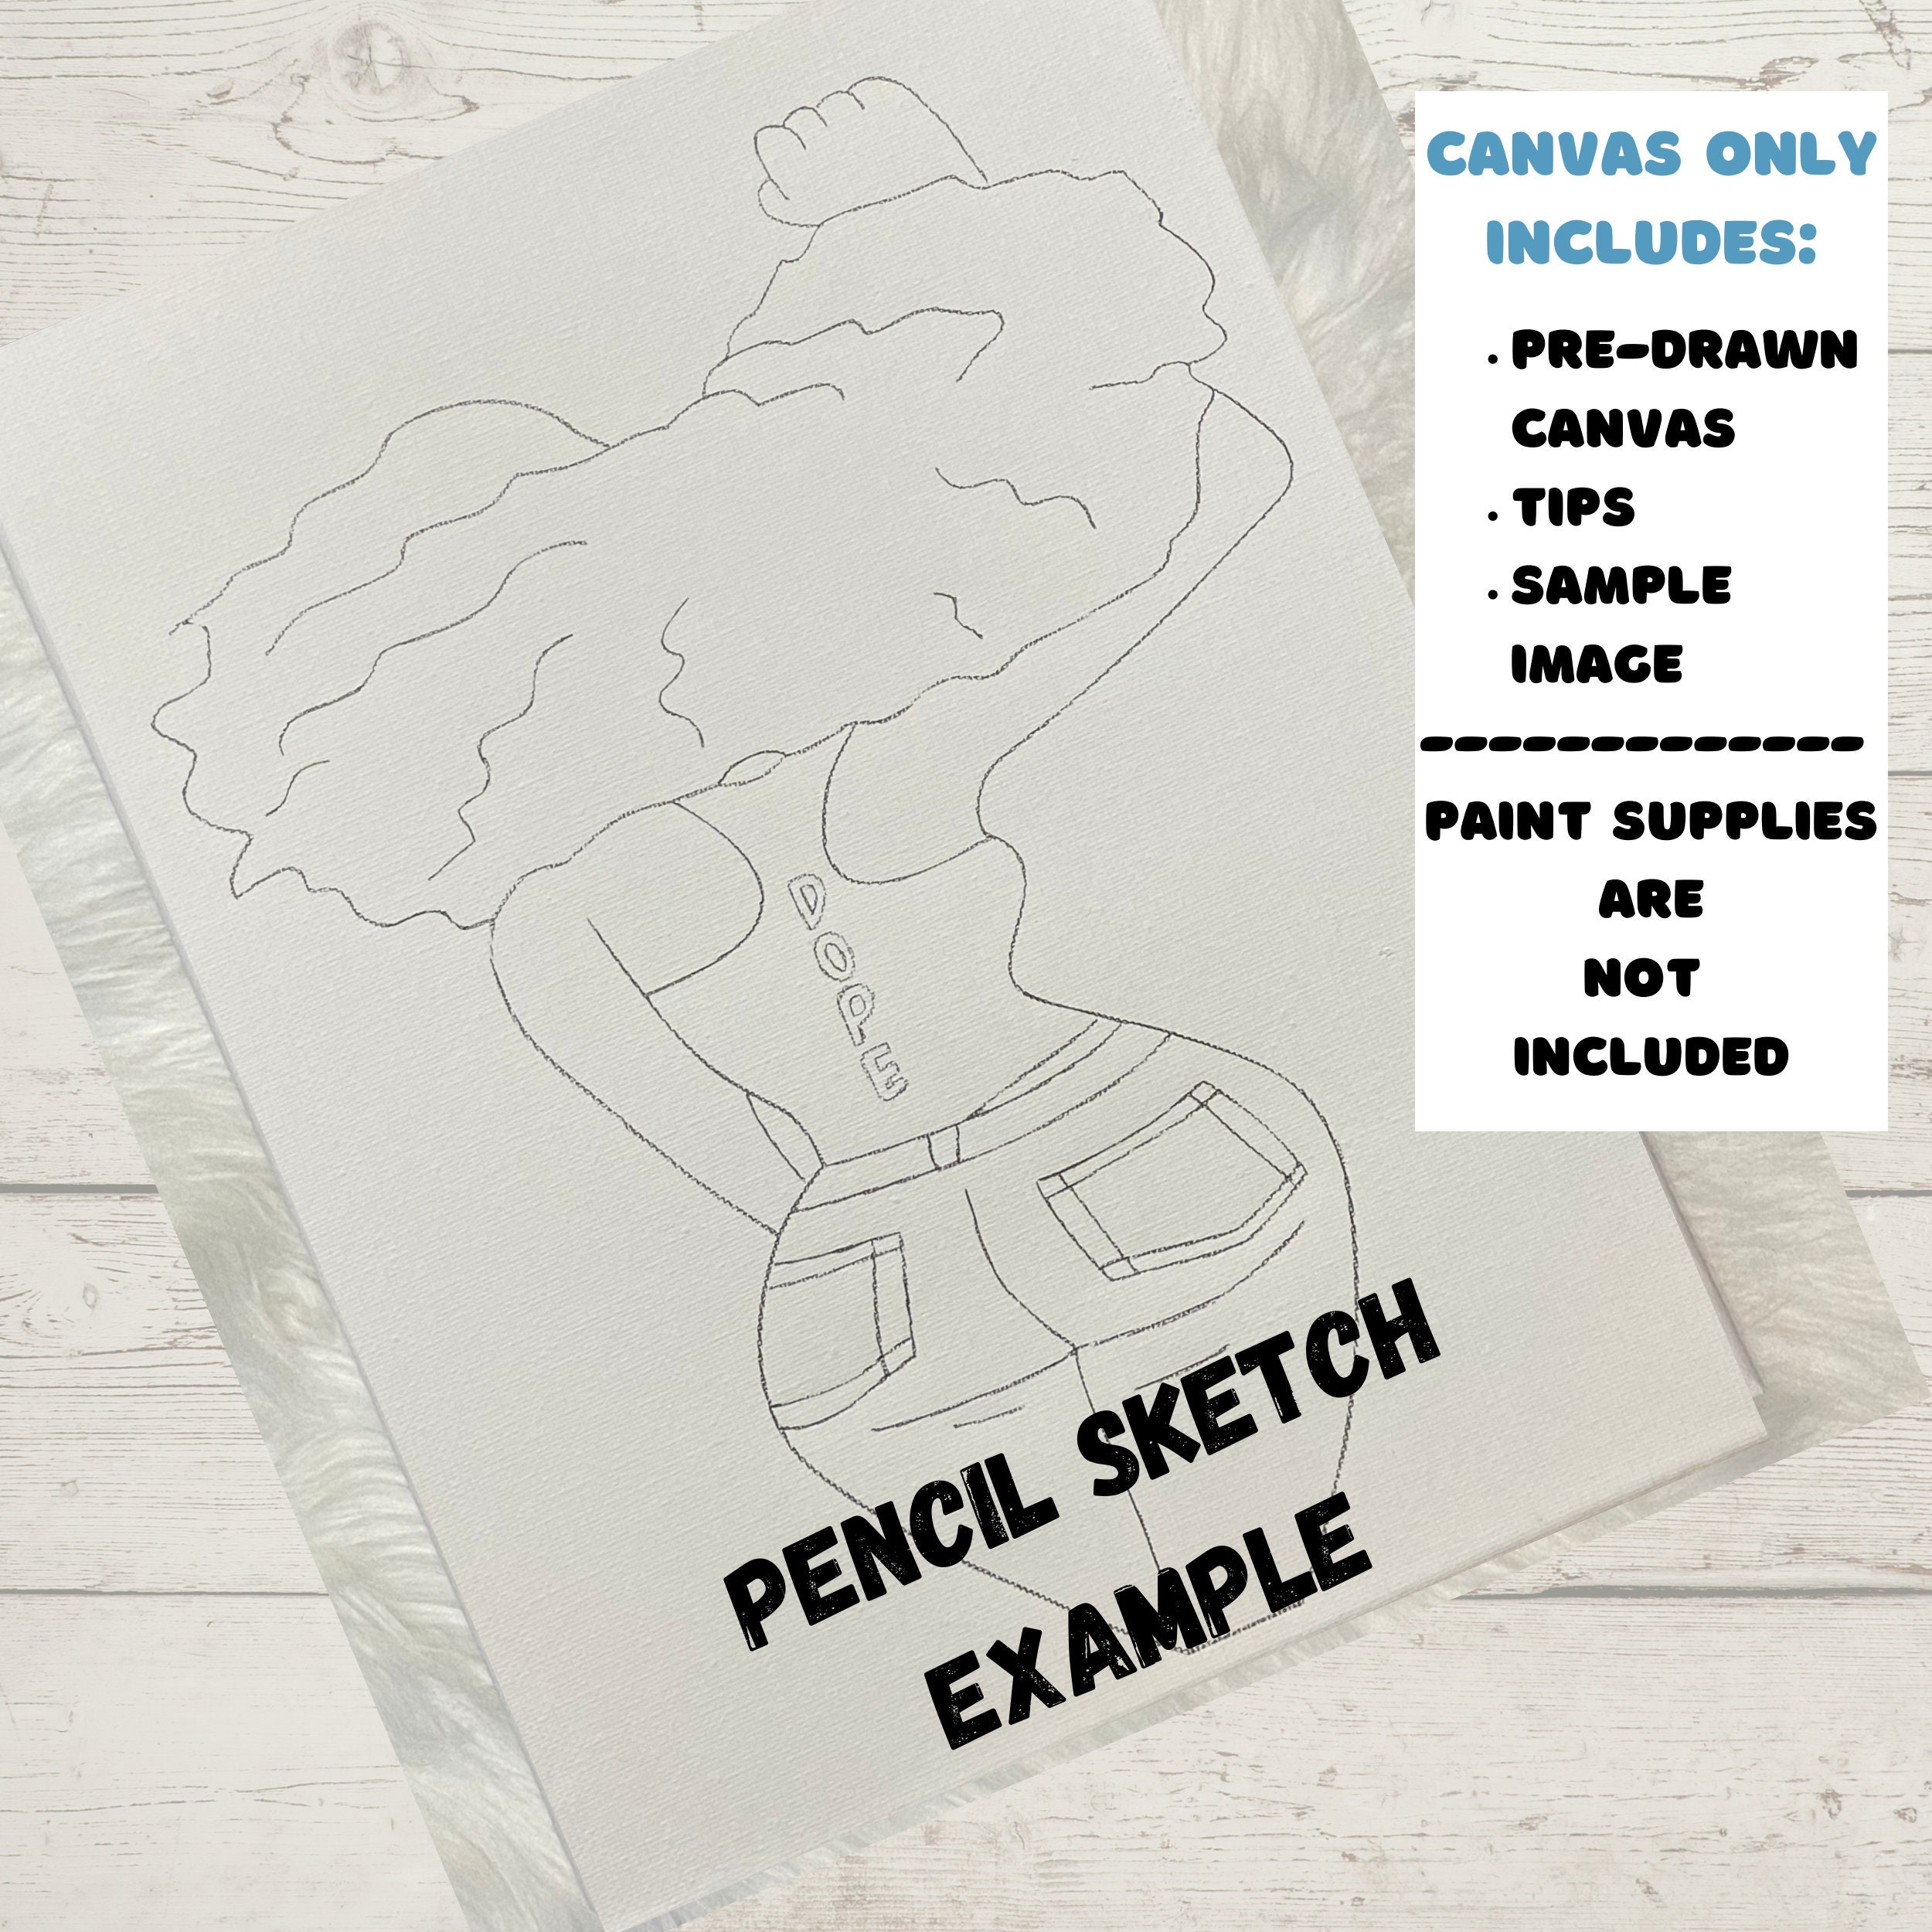 Another Drawing Kit – DRAWINGisSIMPLE